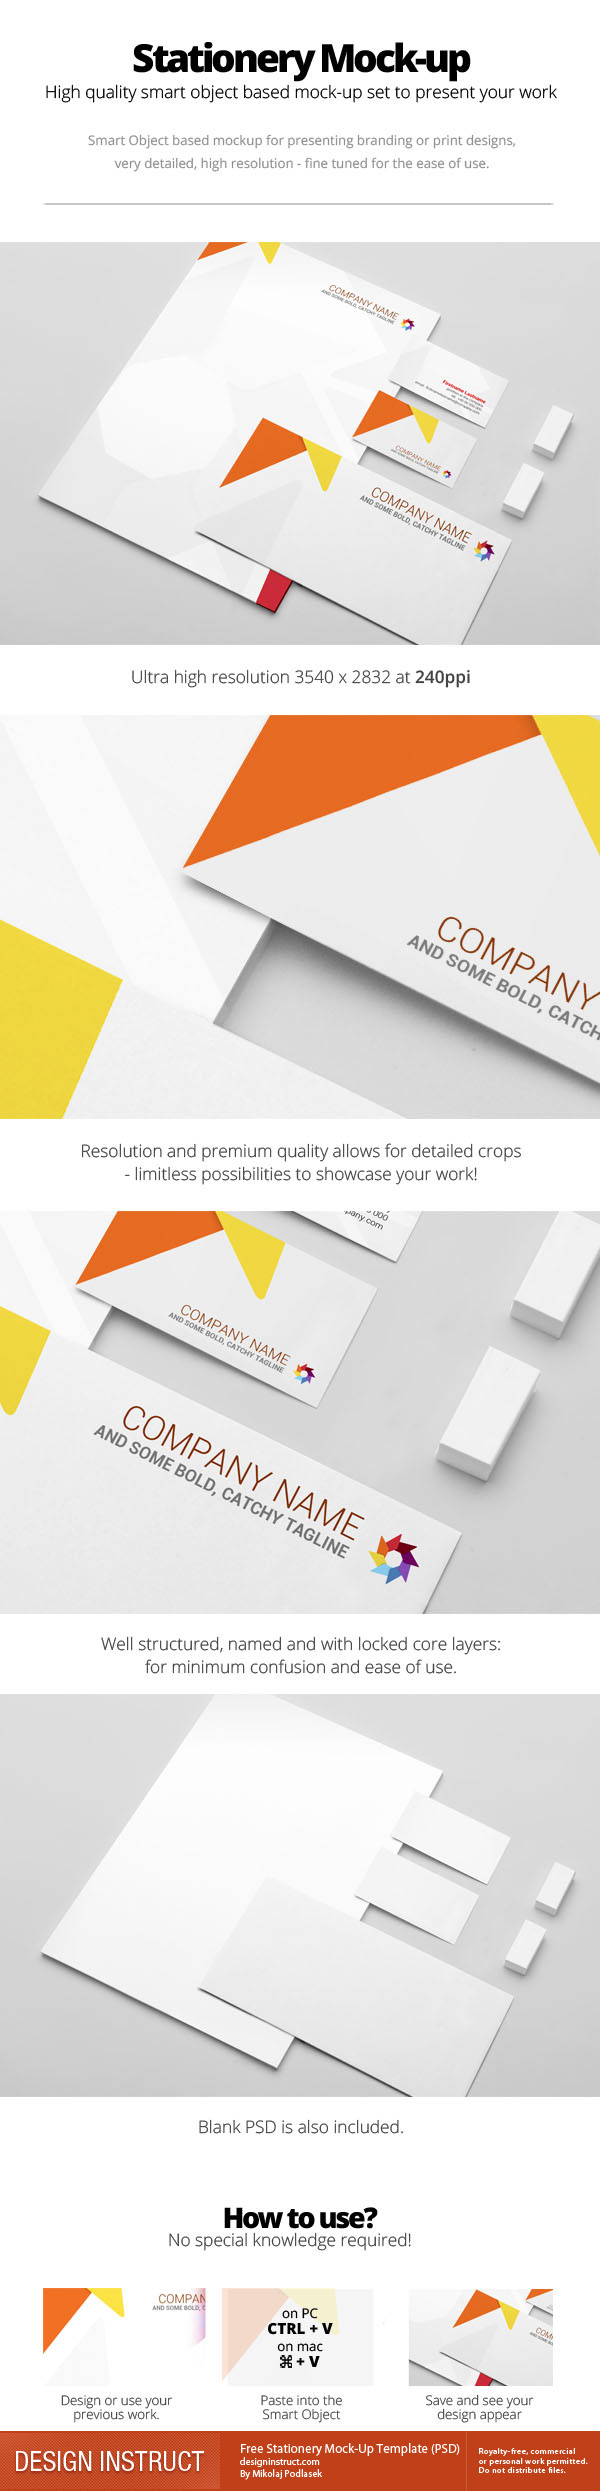 Free Stationery Mock-Up Template (PSD)